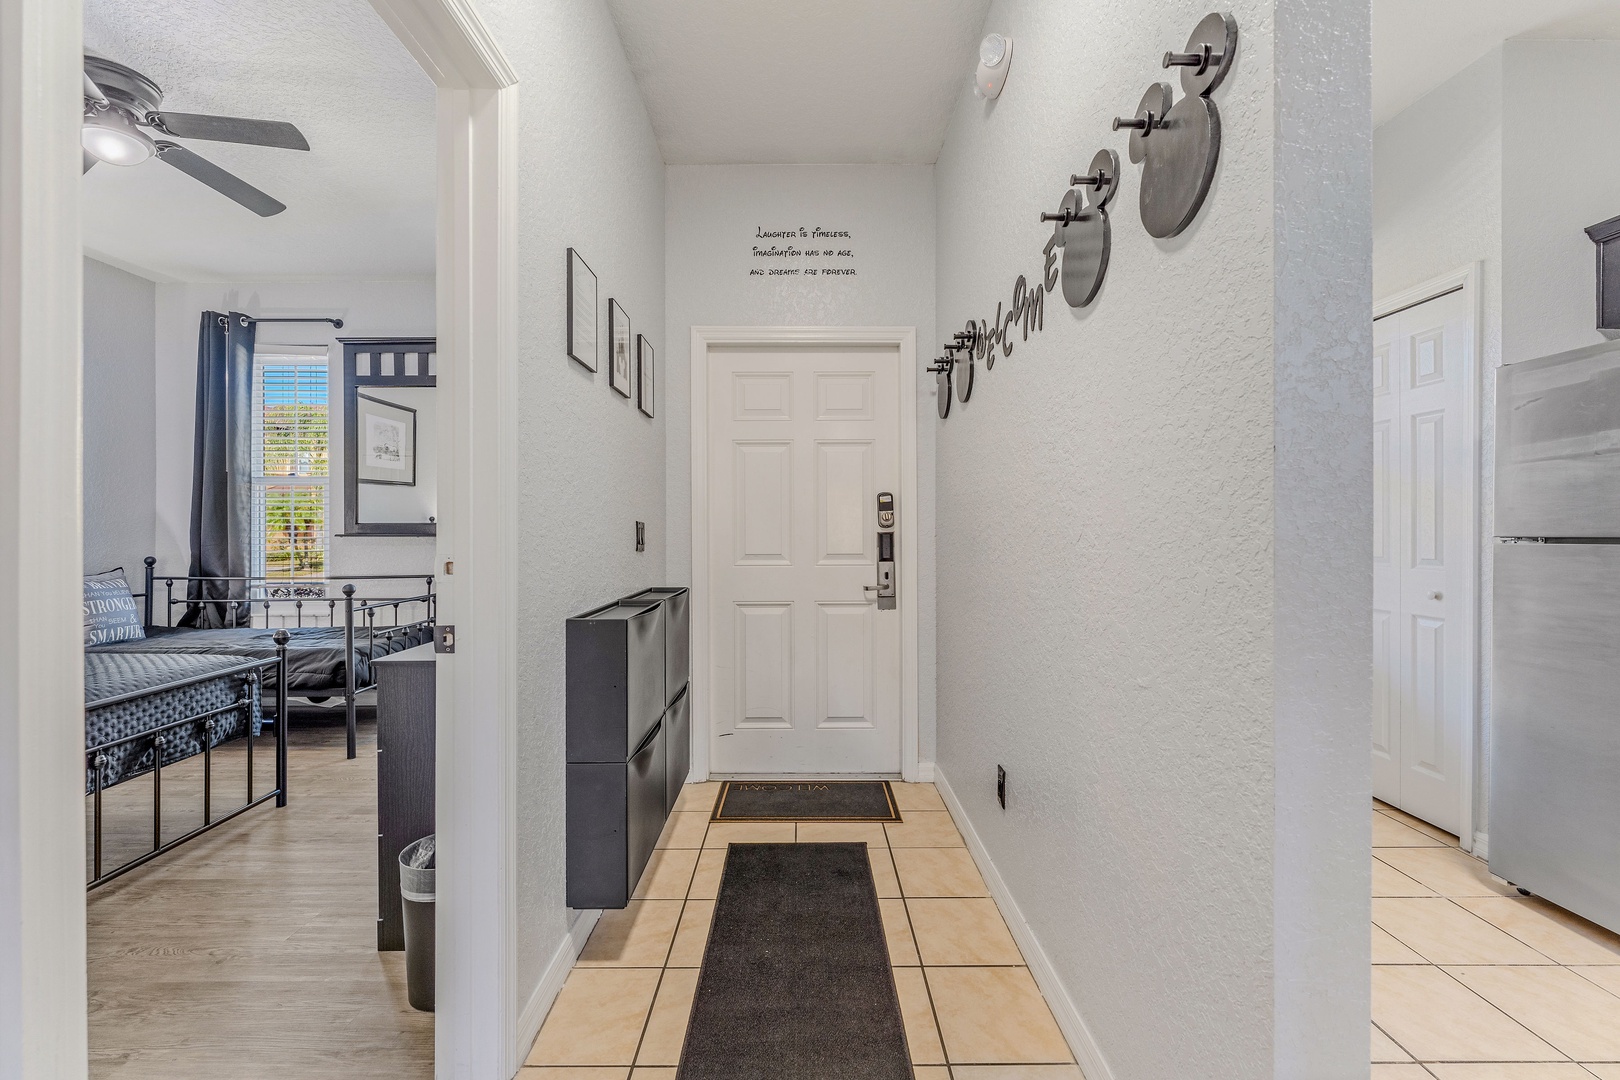 Entryway with everything you need to get settled!